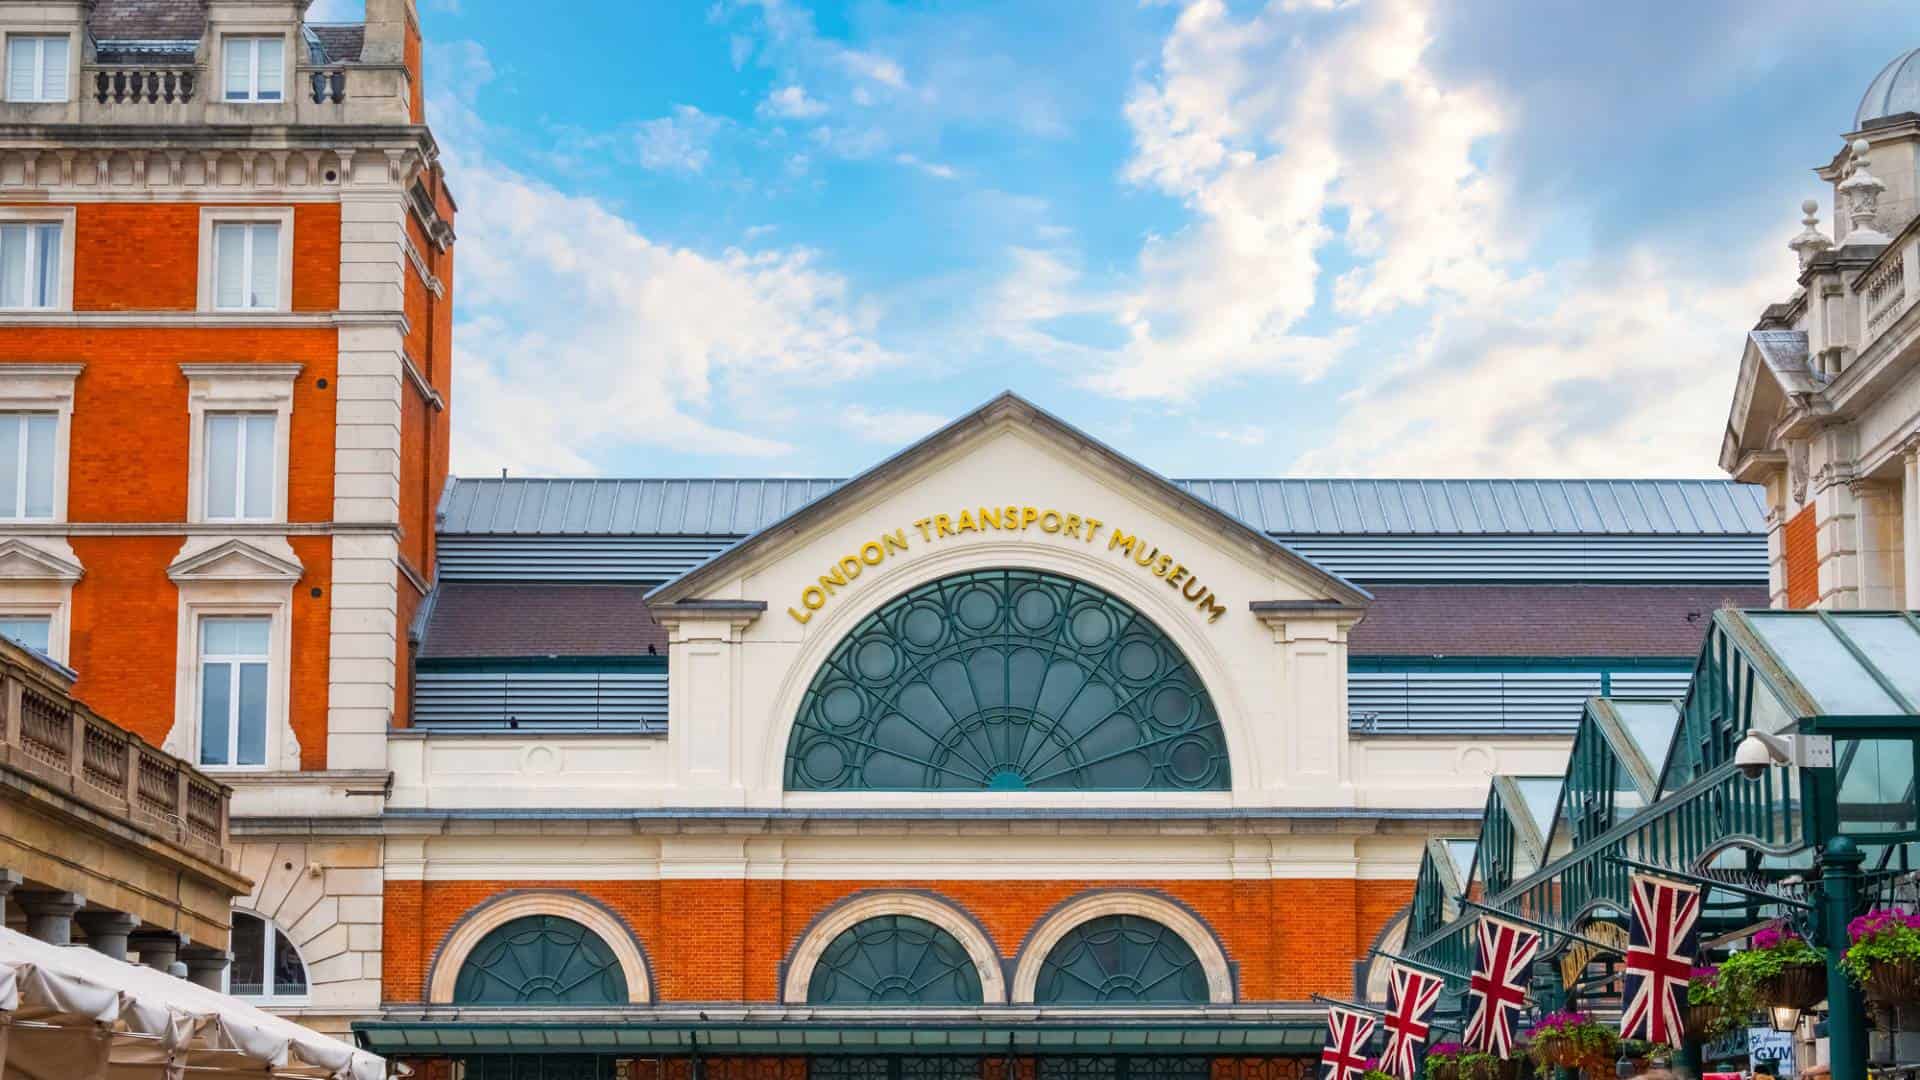 The London Transport Museum in Covent Garden, London, UK